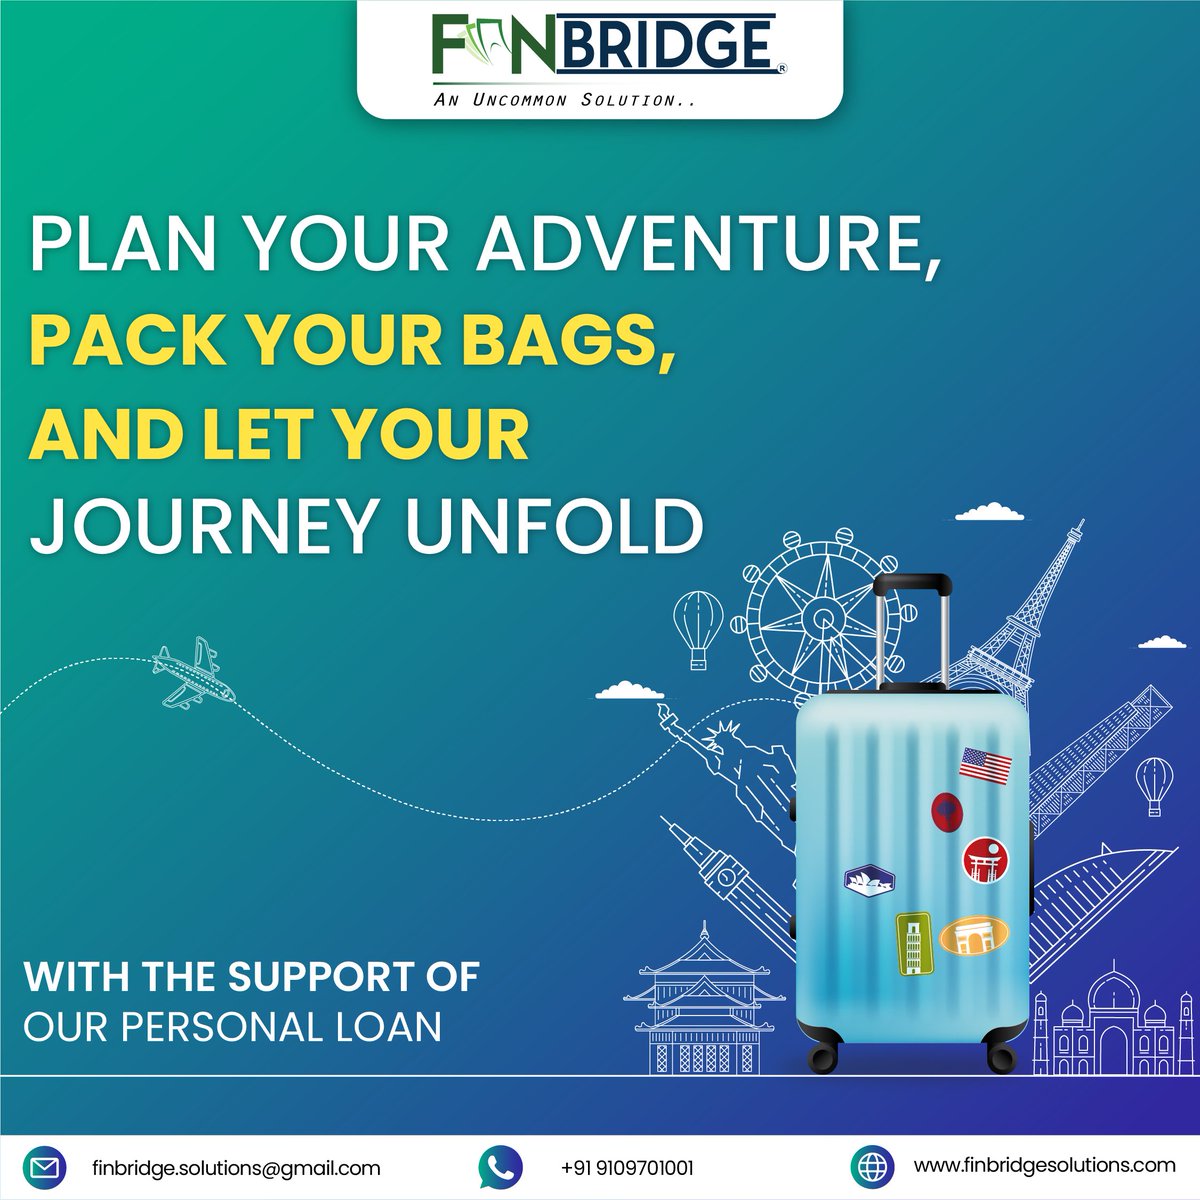 🤝With FinBridge's assistance, we can embark on an even more exciting journey ✈️ without financial 💵 worries holding us back.
#finbridgefintech #moreexcitingjourneyahead #growfinancially #enjoylife